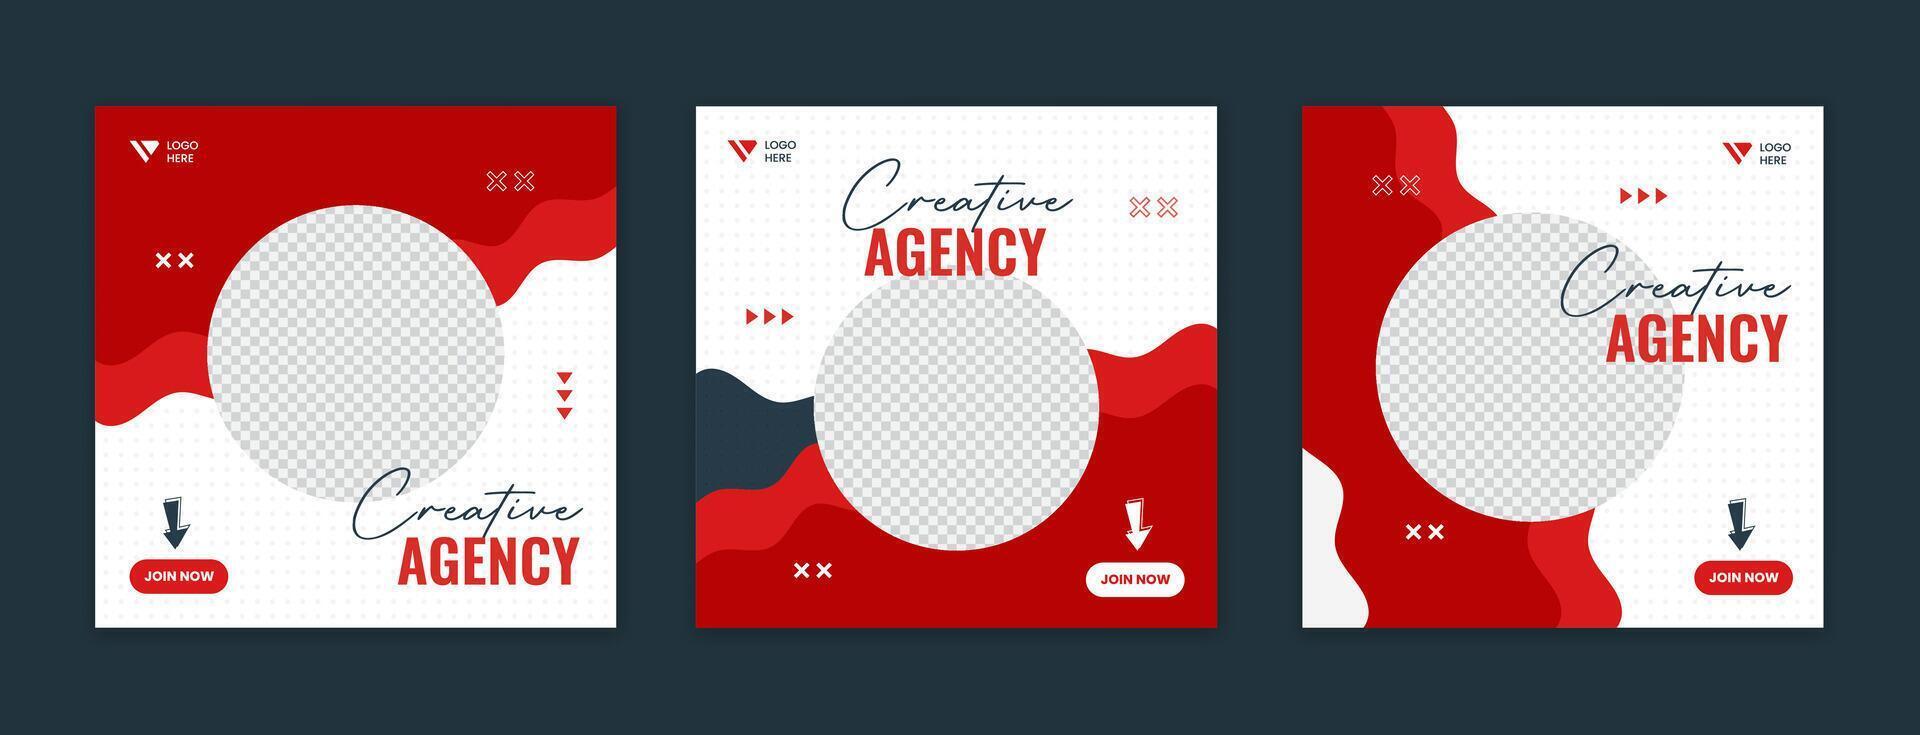 Red organic corporate social media post template design. Set of colourful business creative agency square post vector